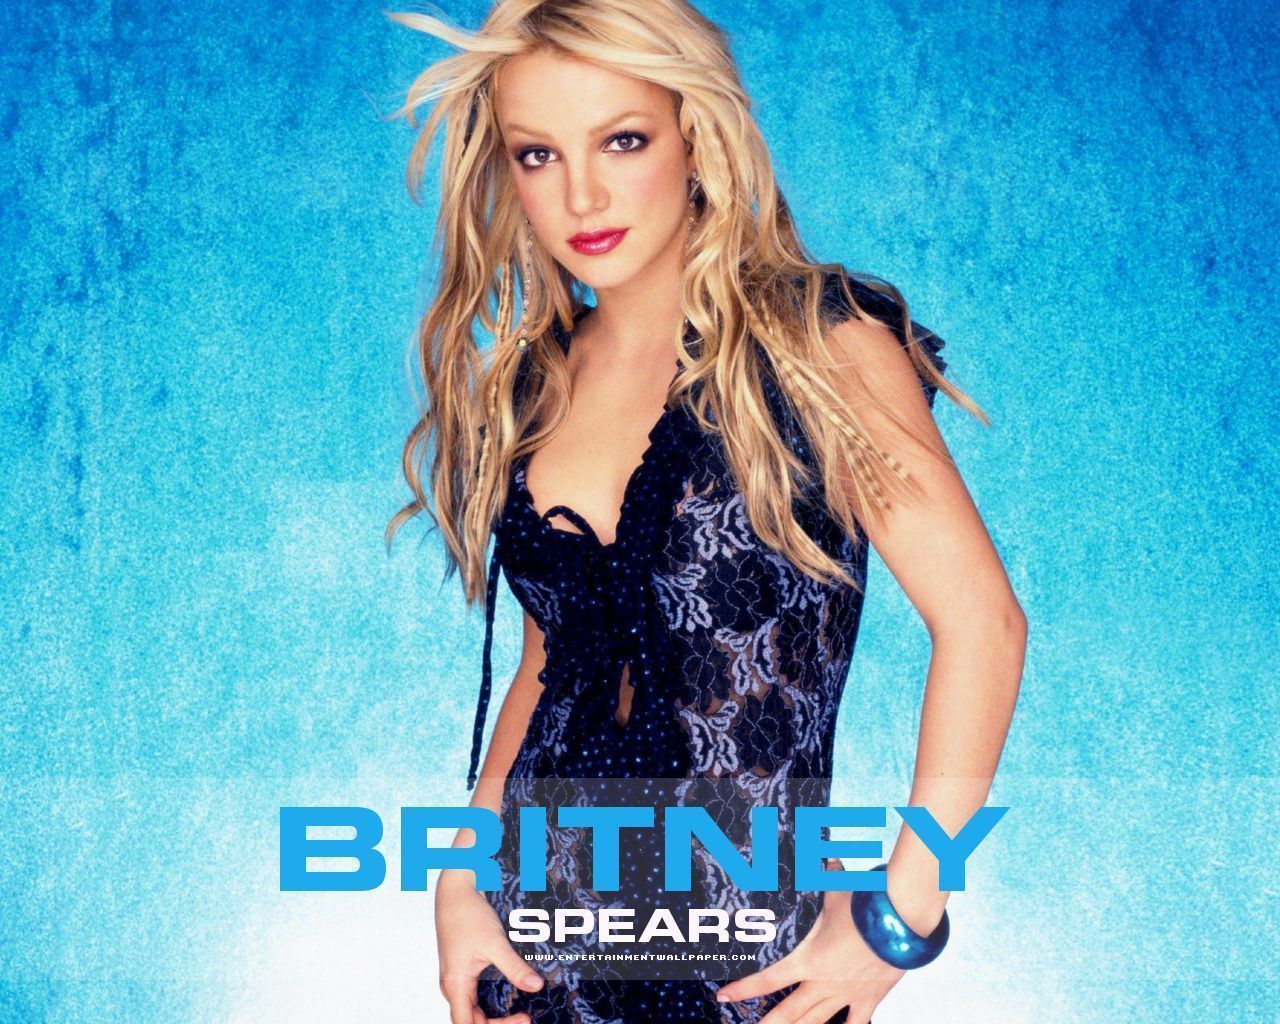 Iphone Britney Spears Wallpapers Full HD Pictures